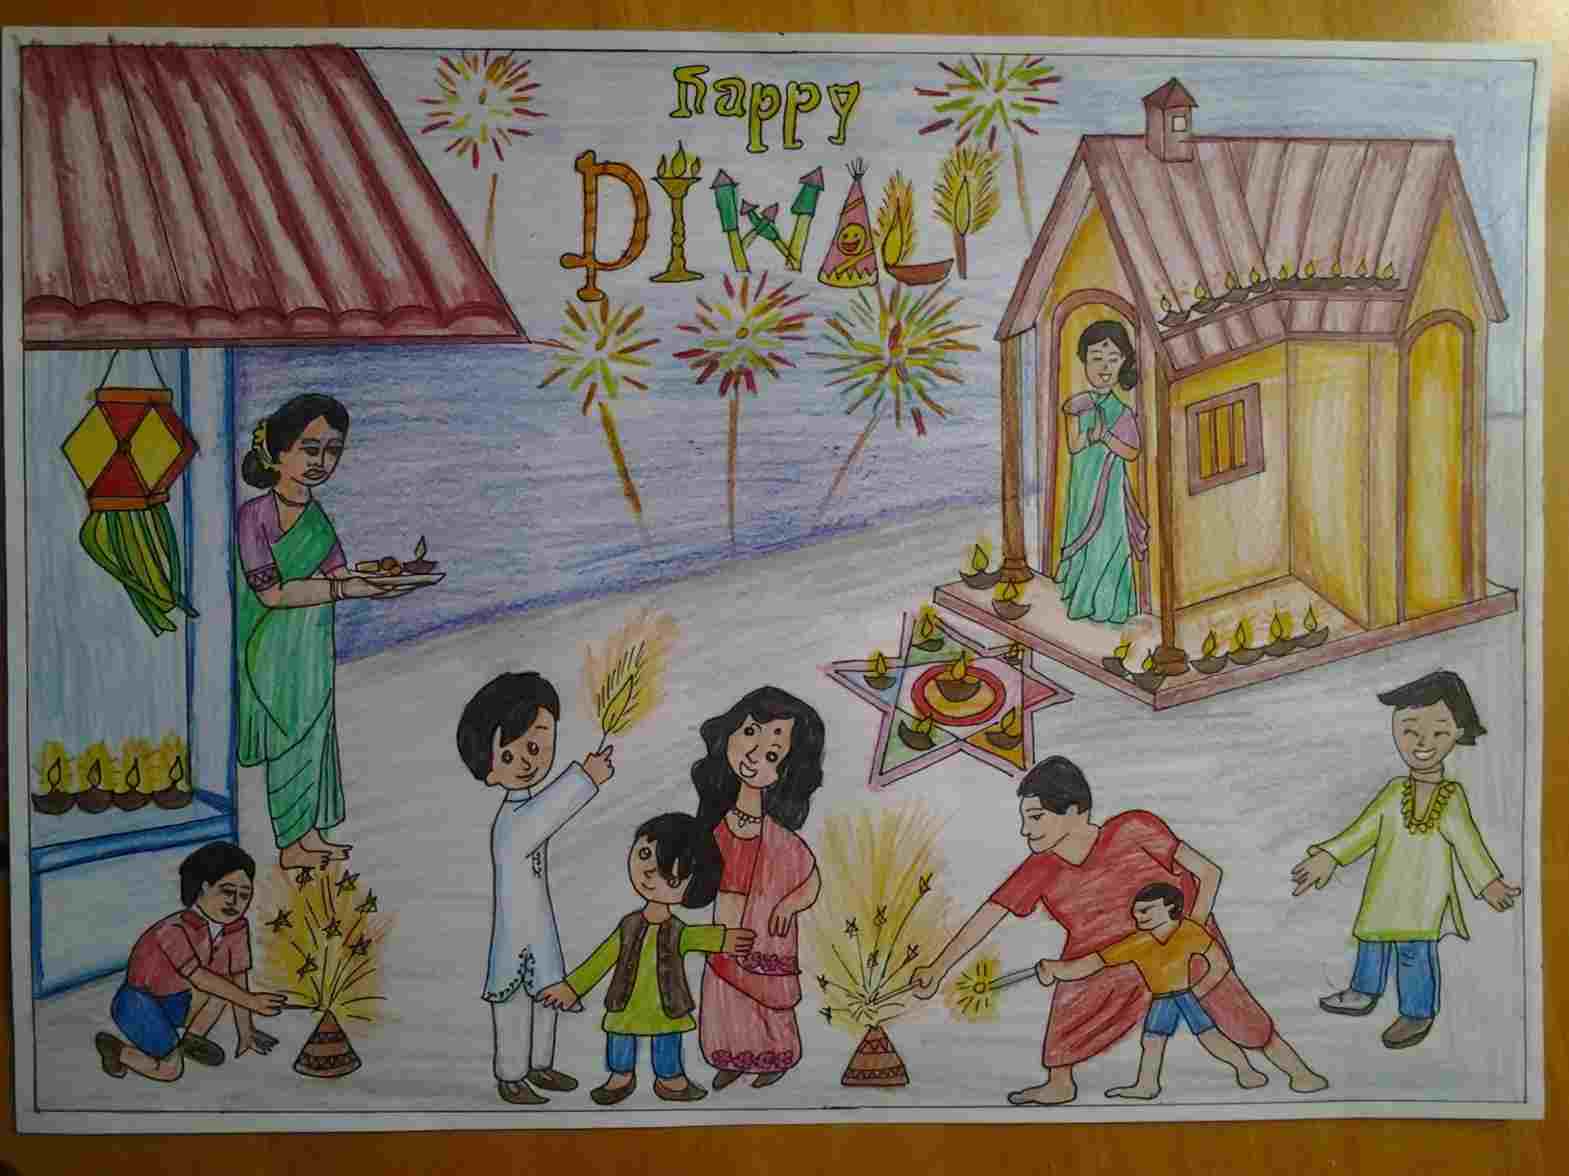 How to draw and colour easy Diwali drawing | how to draw and colour easy diwali  drawing #artuncle #diwalidrawing #oilpasteldrawing #howtodraw #painting # drawing #greetingcards #christmasdrawing... | By ART UNCLE | Facebook